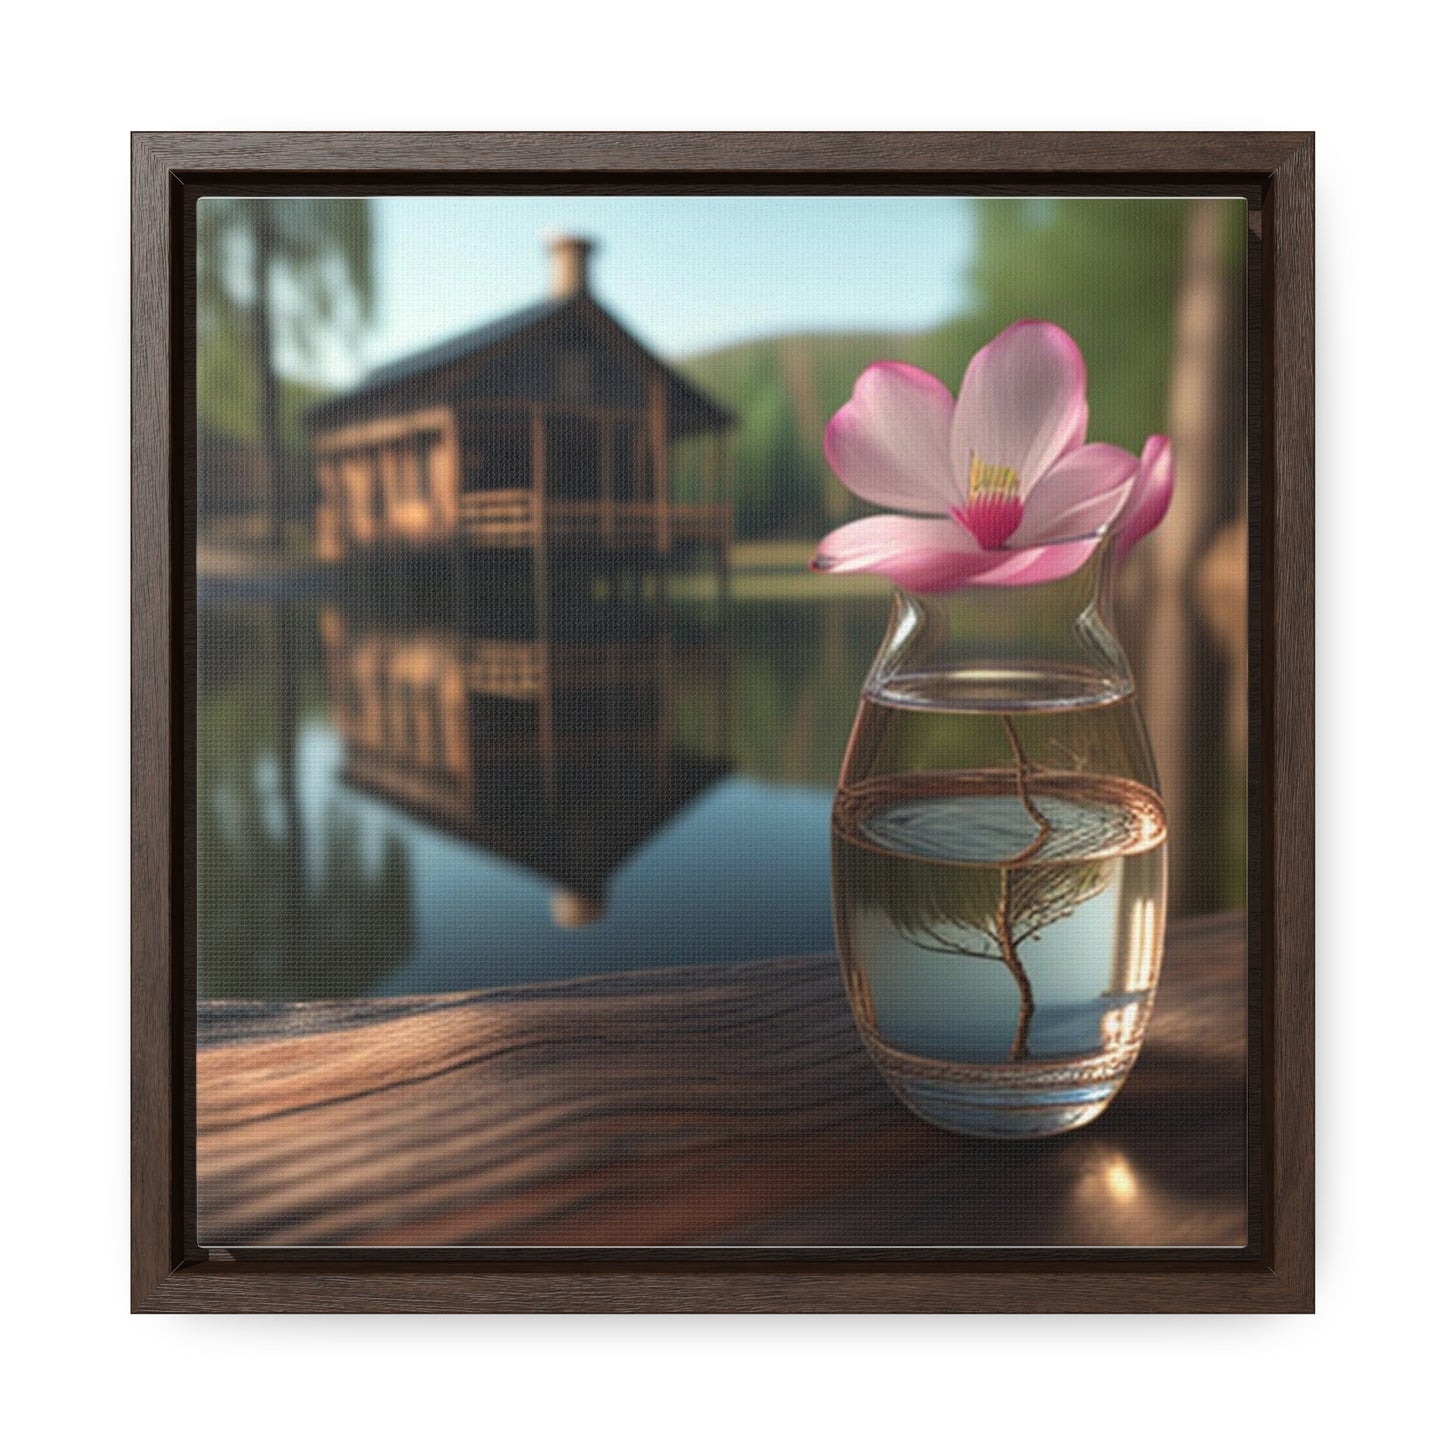 Gallery Canvas Wraps, Square Frame Magnolia in a Glass vase 1